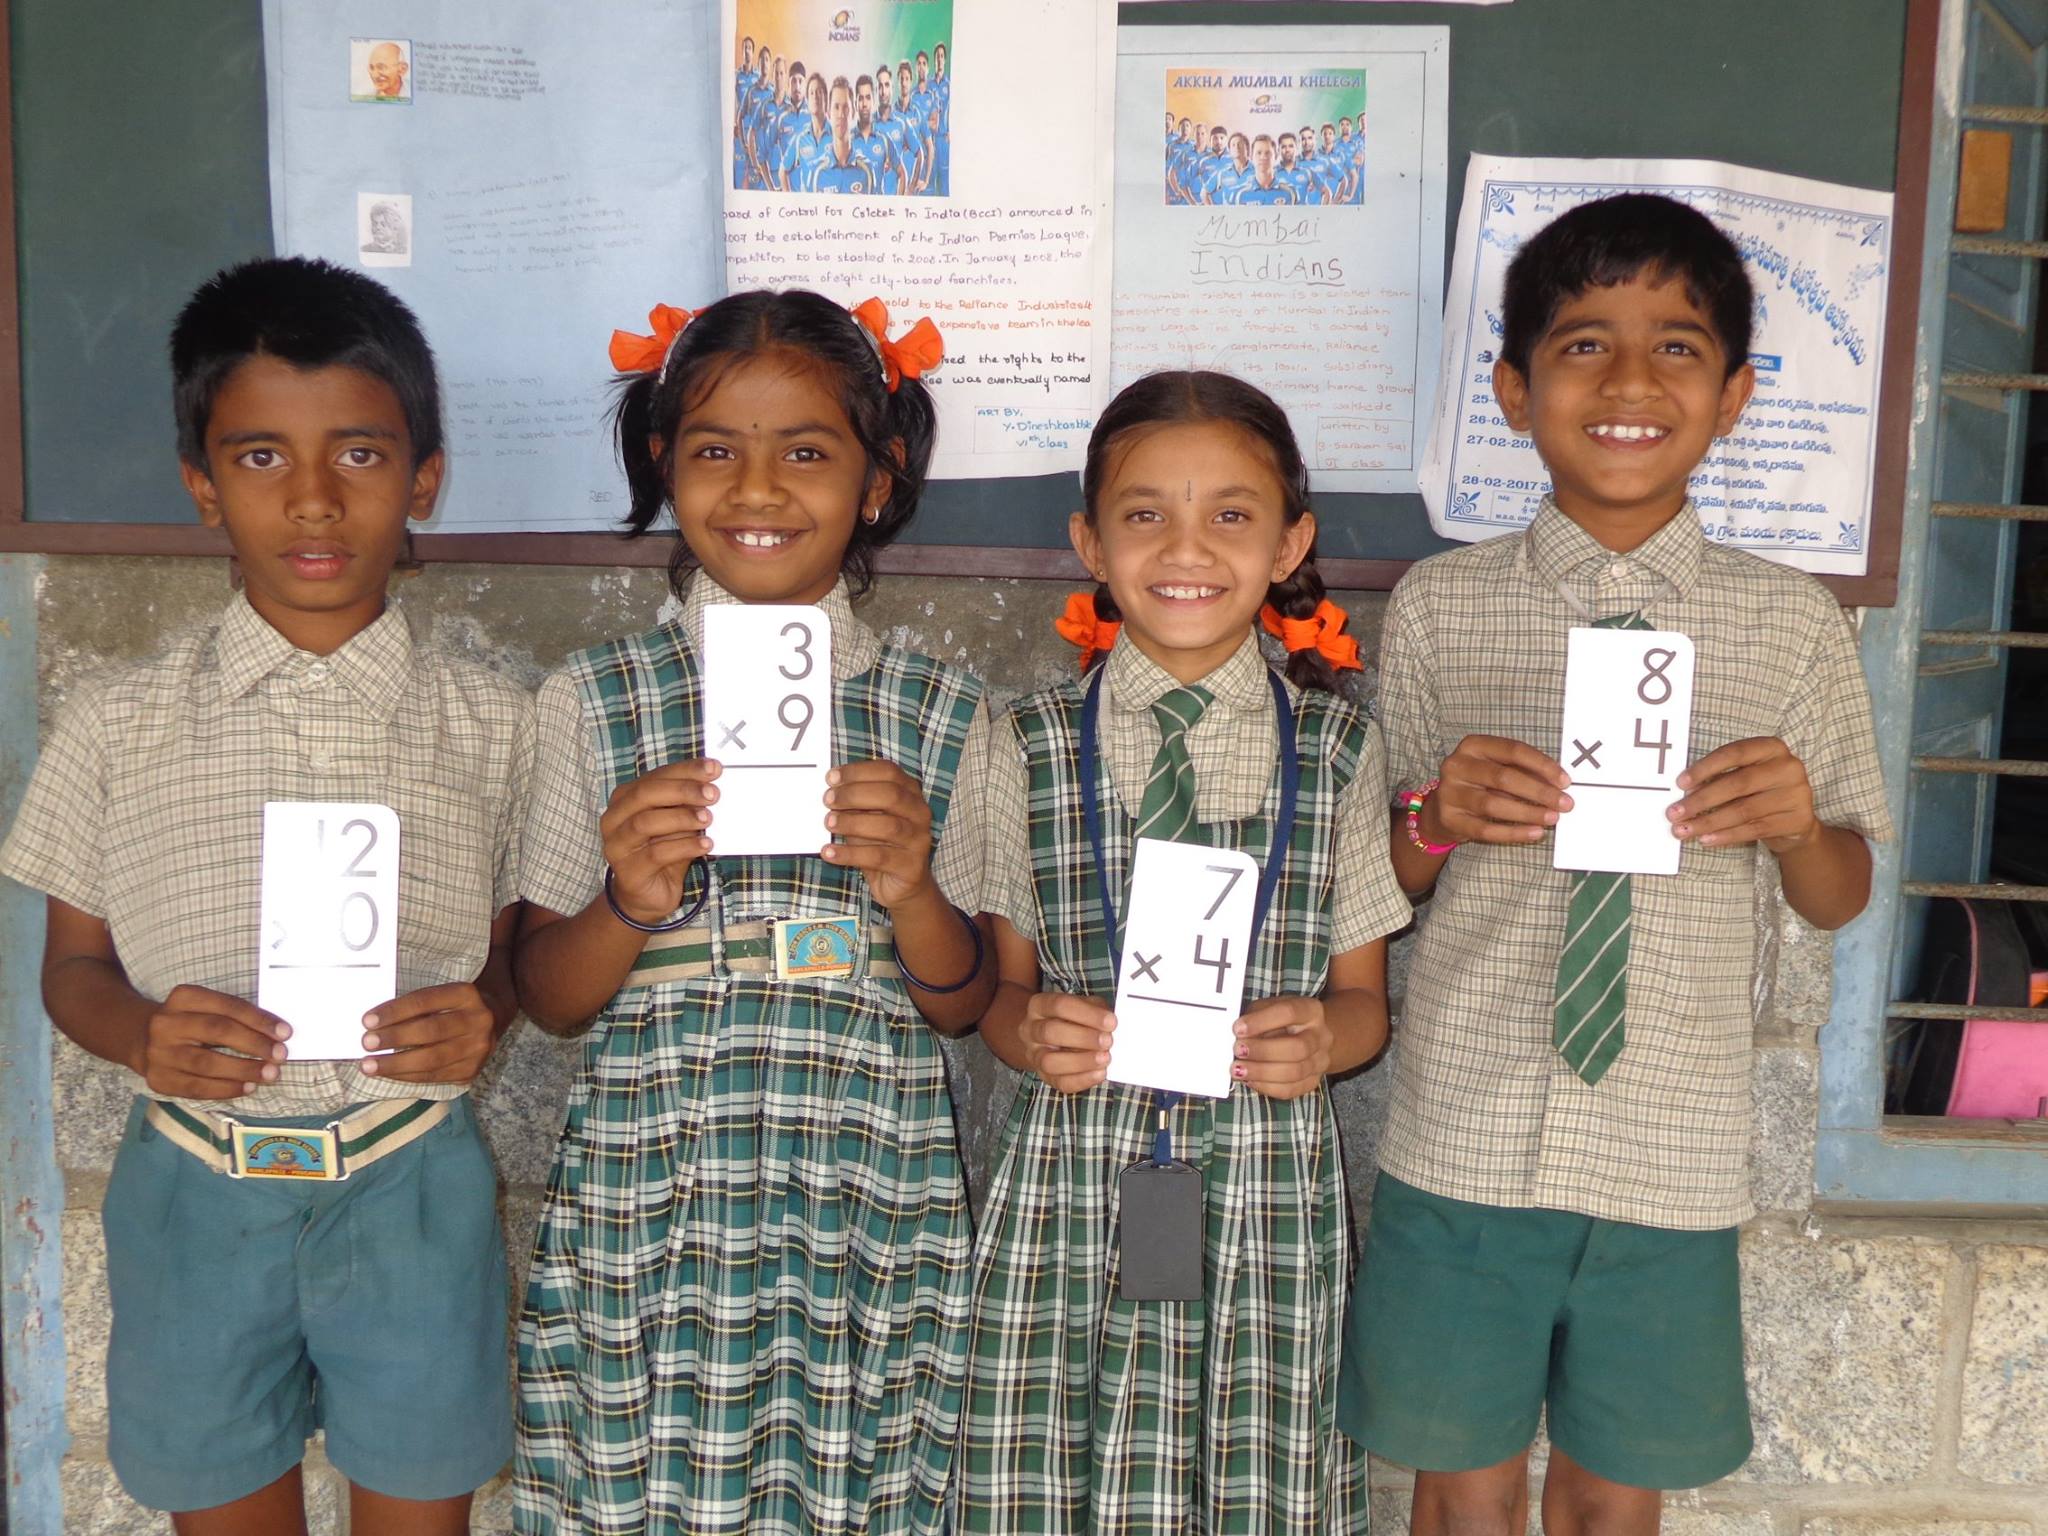 Primary Program students in India hold math materials provided by Opportunity Education, founded by Joe Ricketts